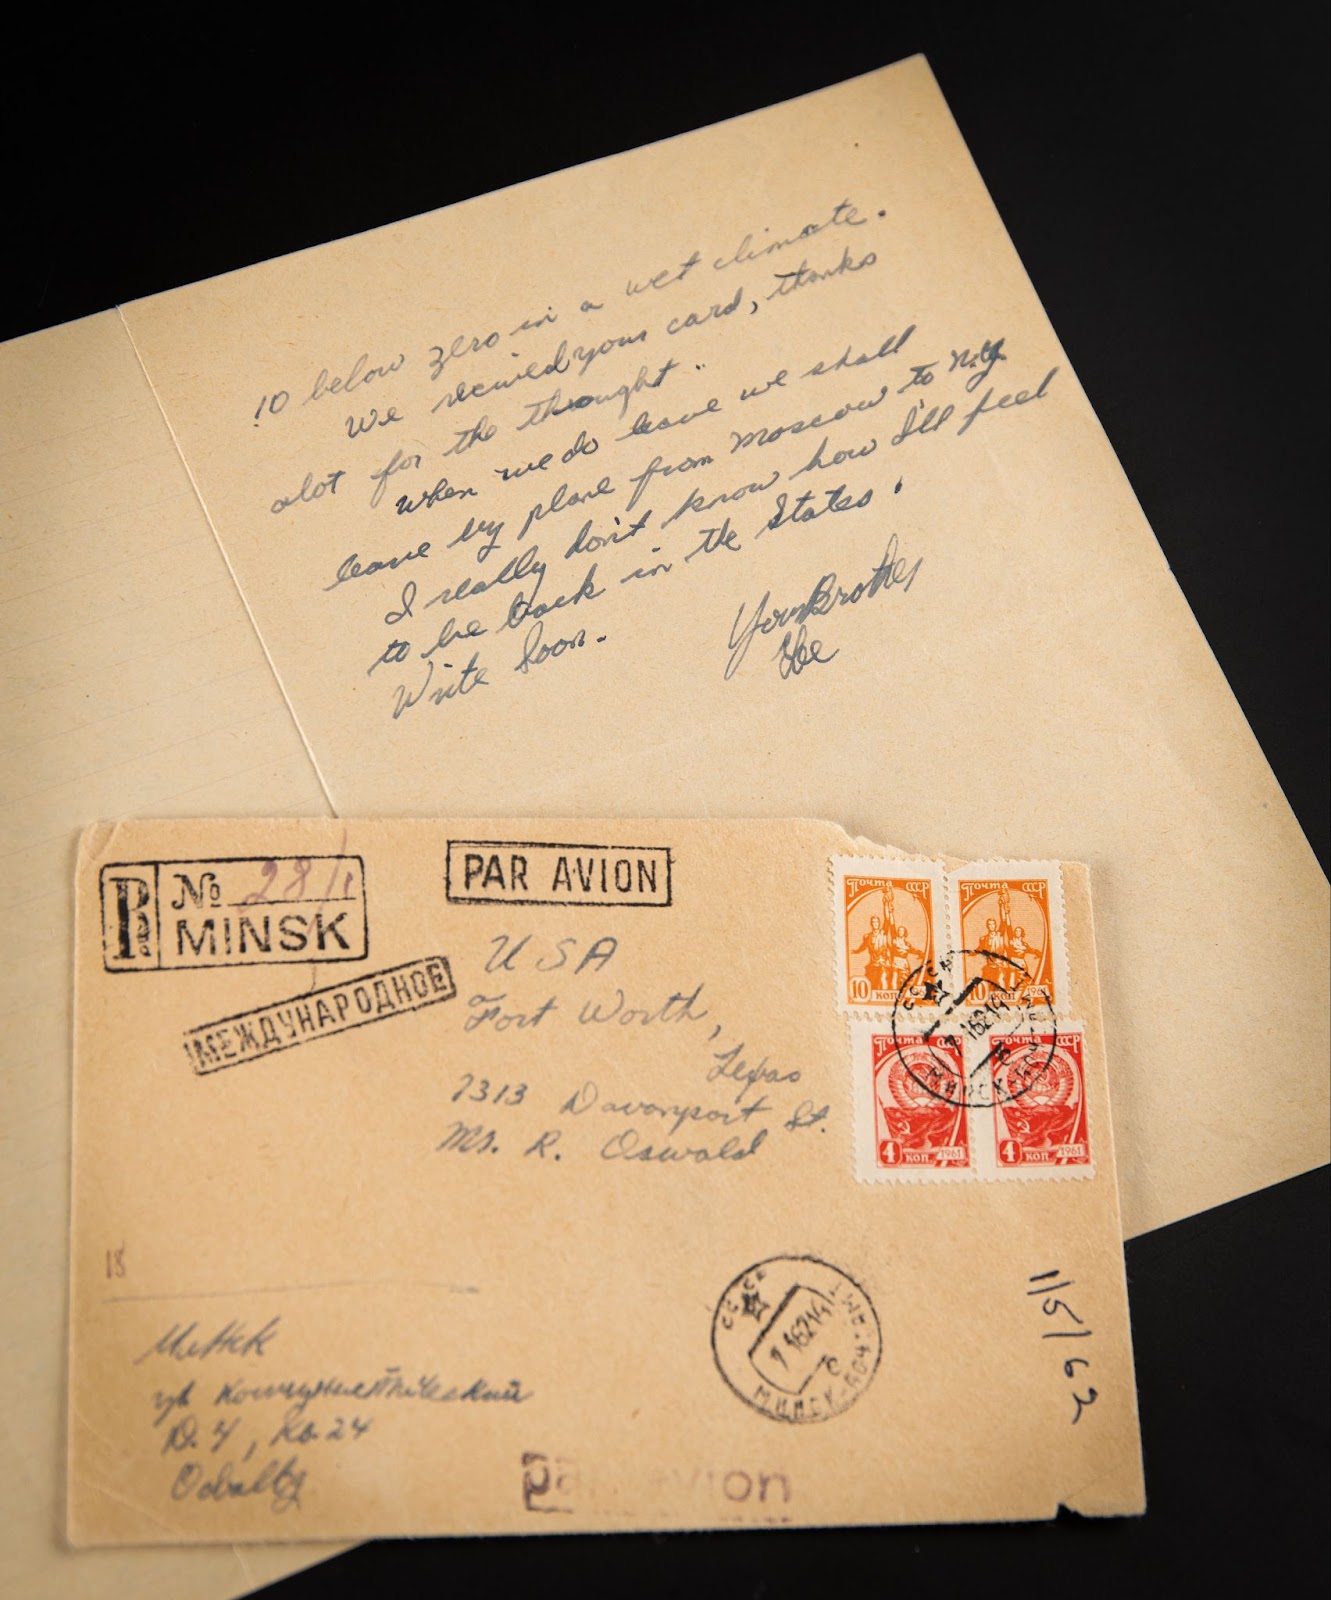 Lee Harvey Oswald’s letter to his brother from the USSR, accompanied by its original hand-addressed envelope to Fort Worth, Texas.